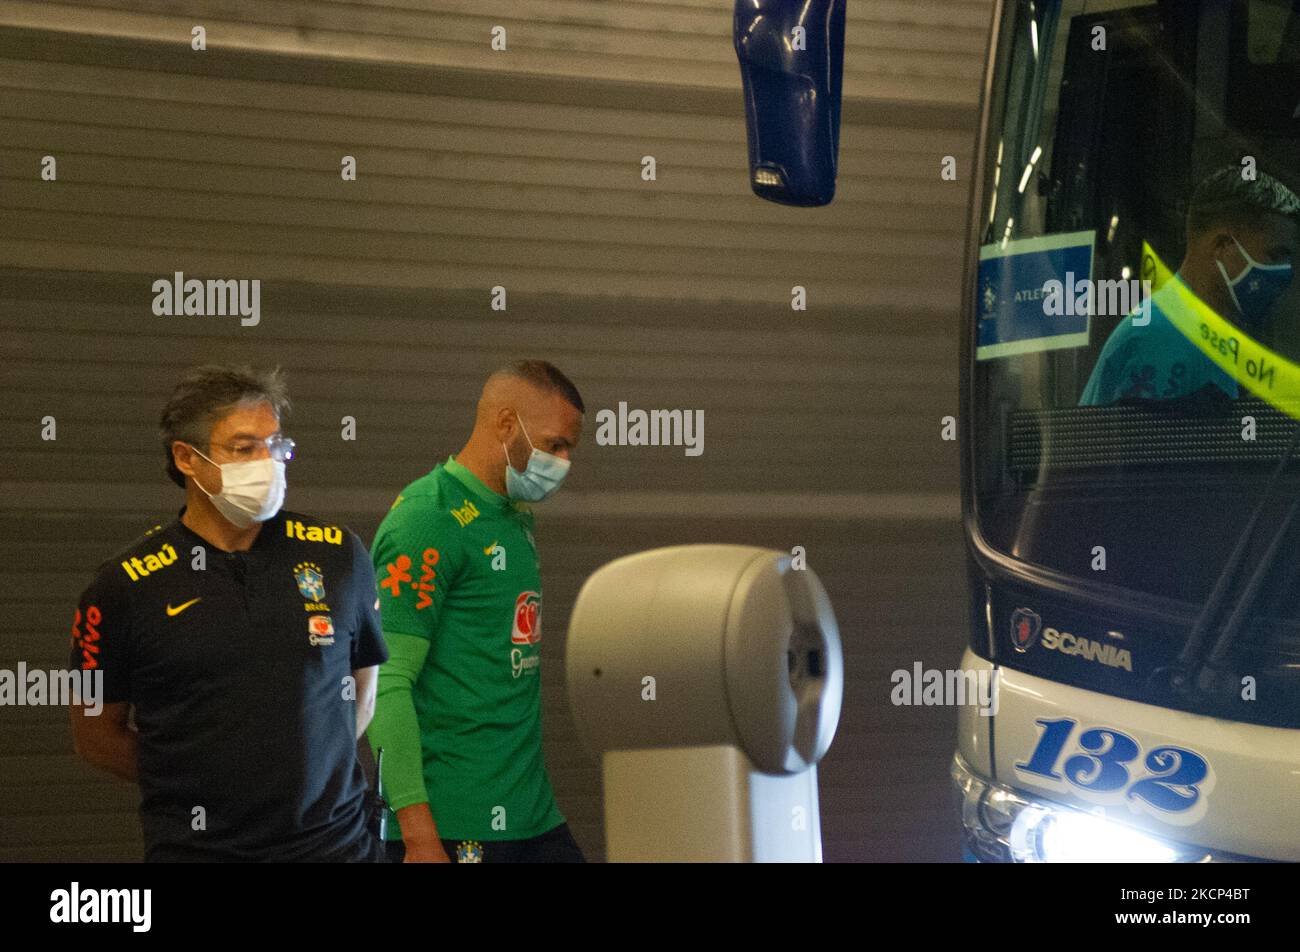 Brazil's football team Weverton as members of the Brazil federation of football team board their bus at the Grand Hyatt Hotel in Bogota, Colombia to be transported to the Techo stadium for practice against the qualifying matches between Venezuela and Colombia, on October 4, 2021. (Photo by Sebastian Barros/NurPhoto) Stock Photo